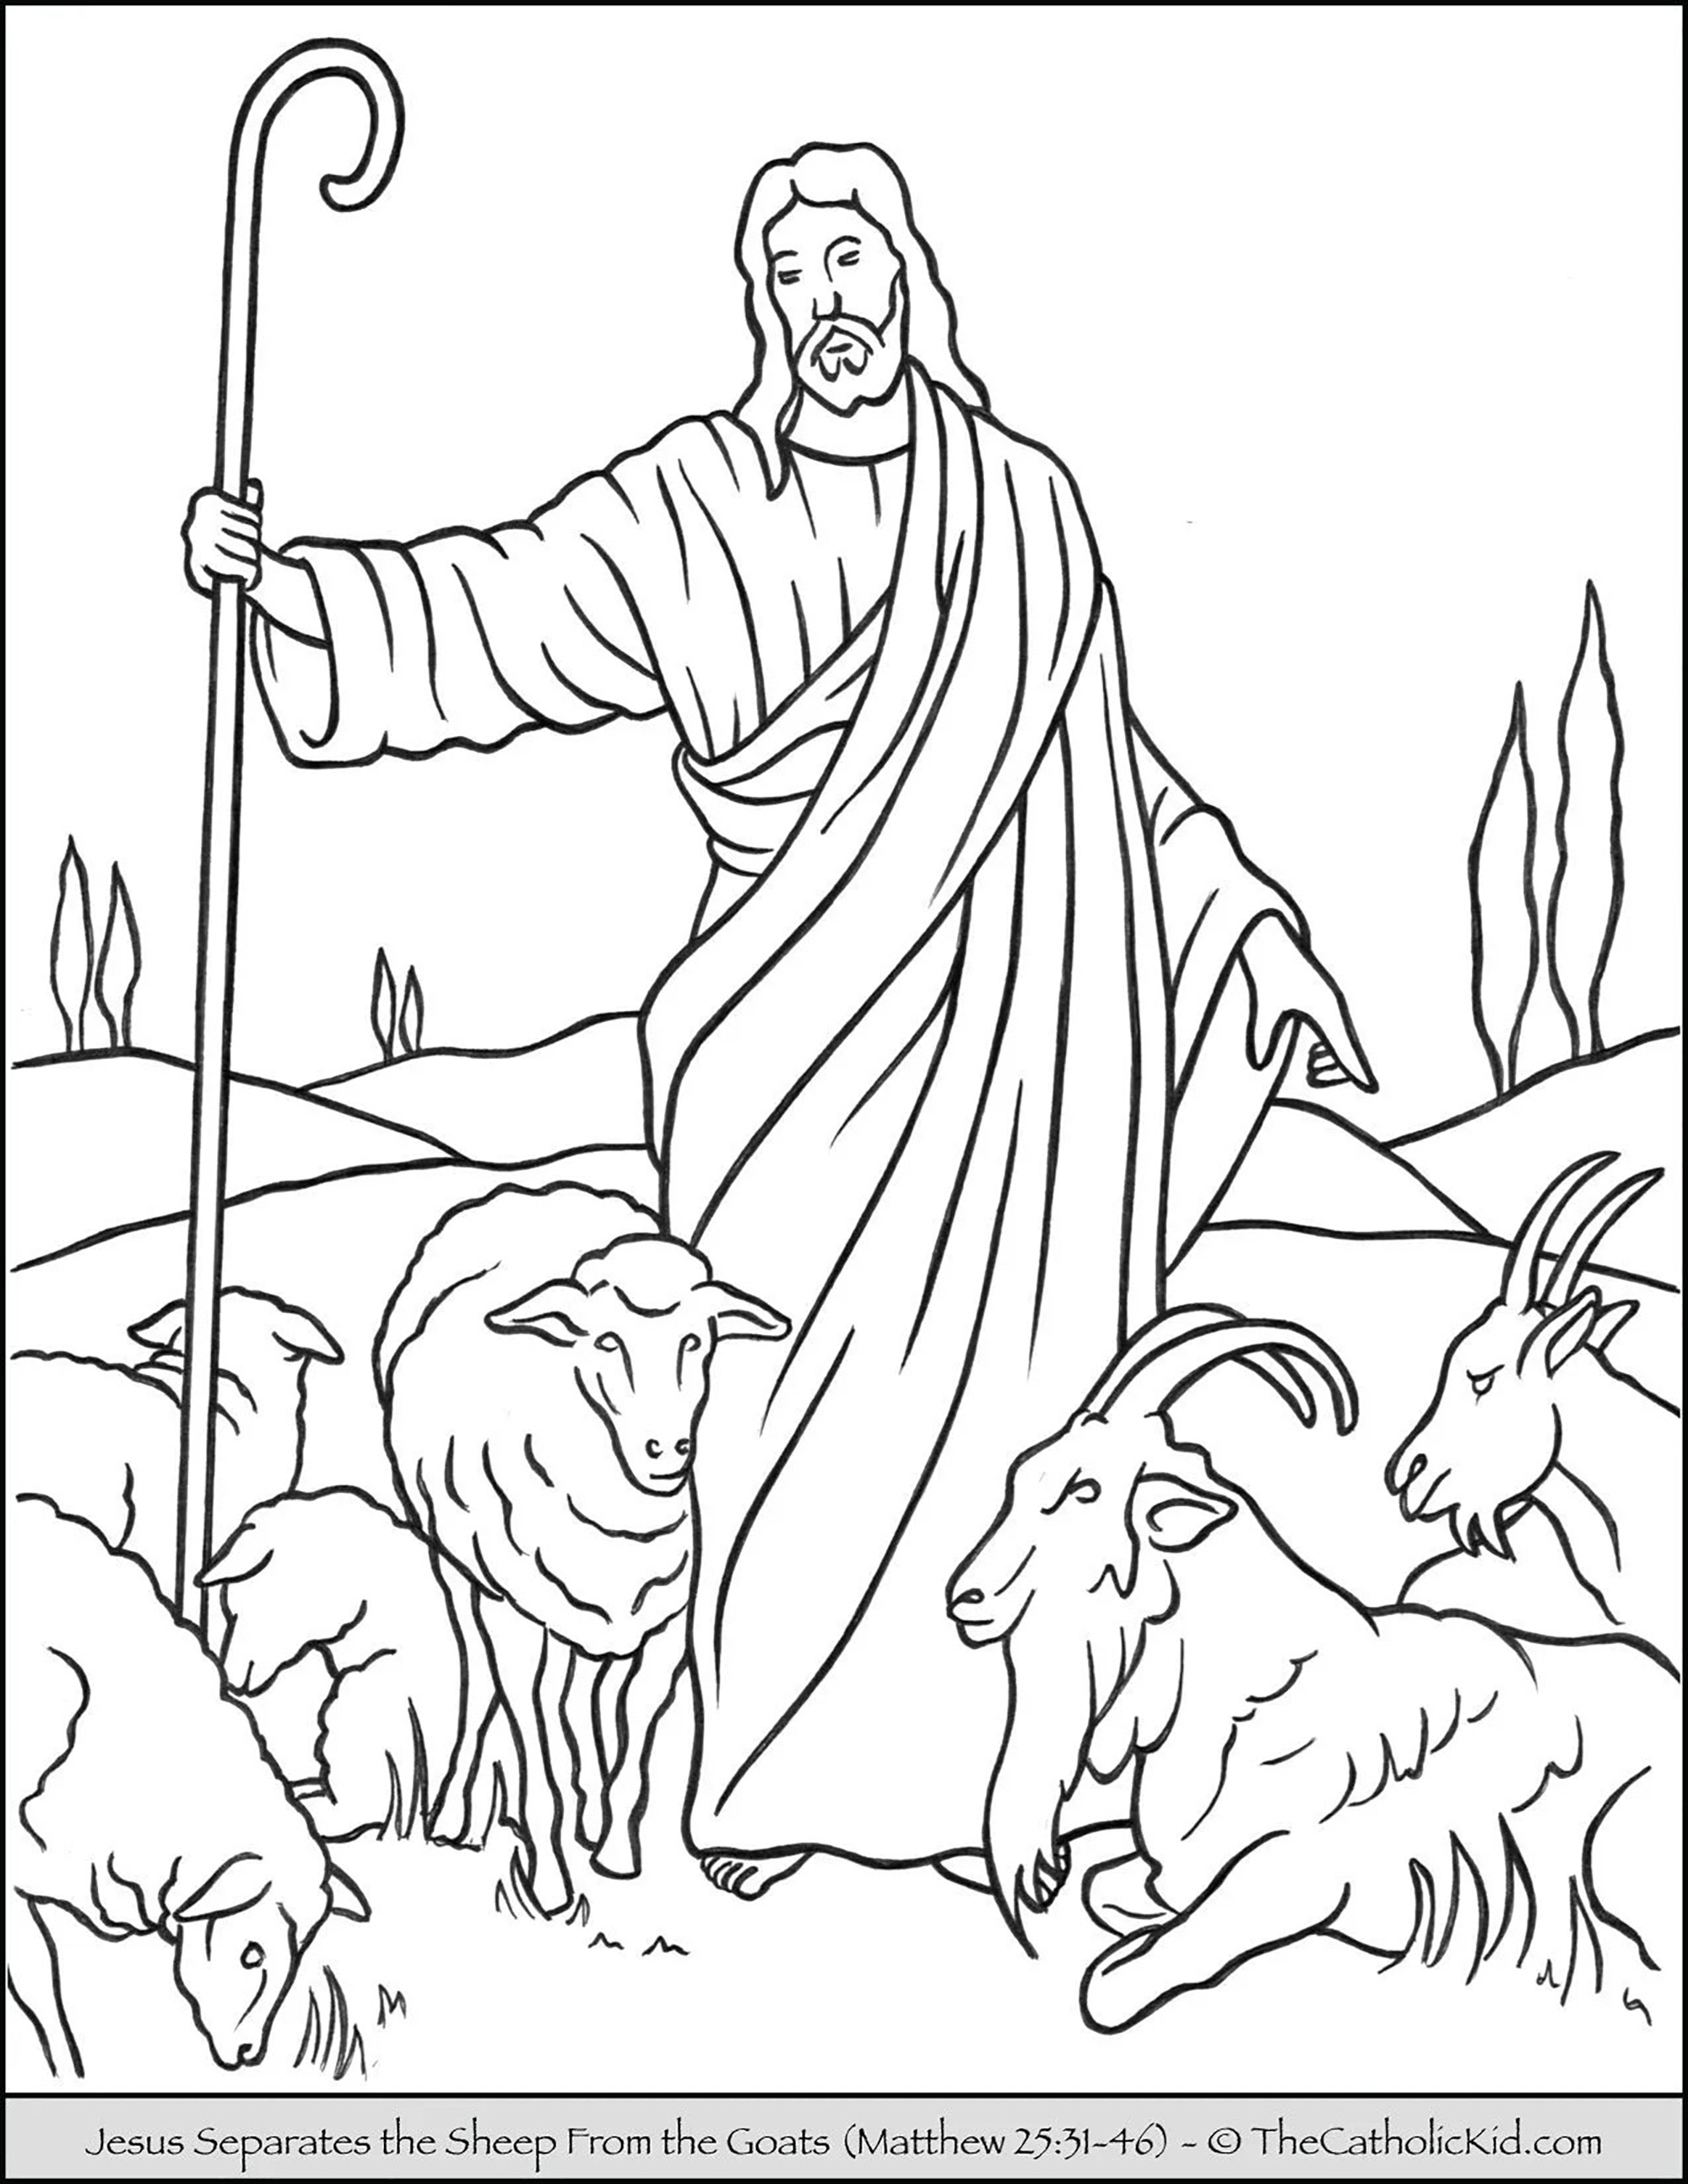 Jesus separating the sheep from the goats. This parable is about the time of judgment. The sheep symbolize those who follow and obey Christ, while the goats represent those who have chosen not to follow Jesus and his example on earth (a witness).